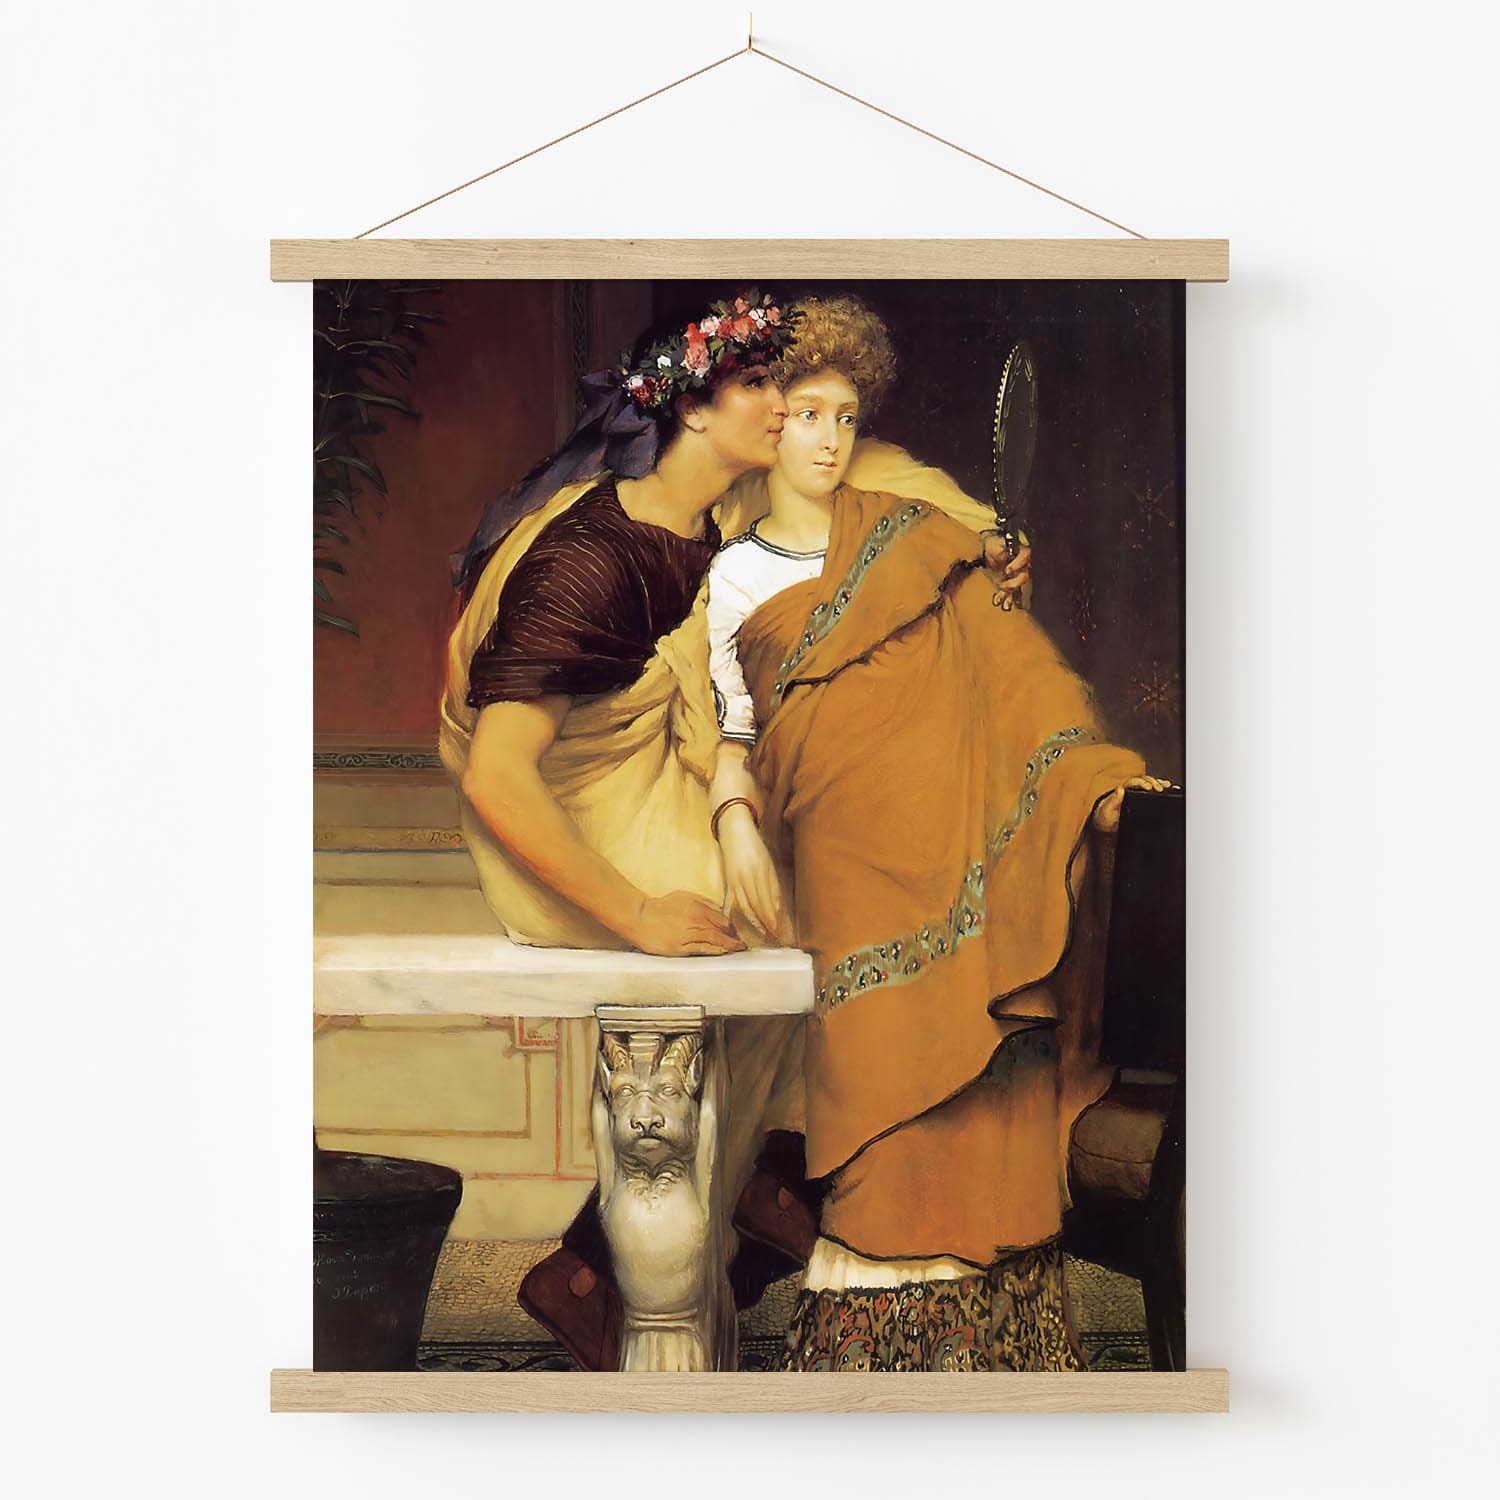 Two Young Lovers Art Print in Wood Hanger Frame on Wall